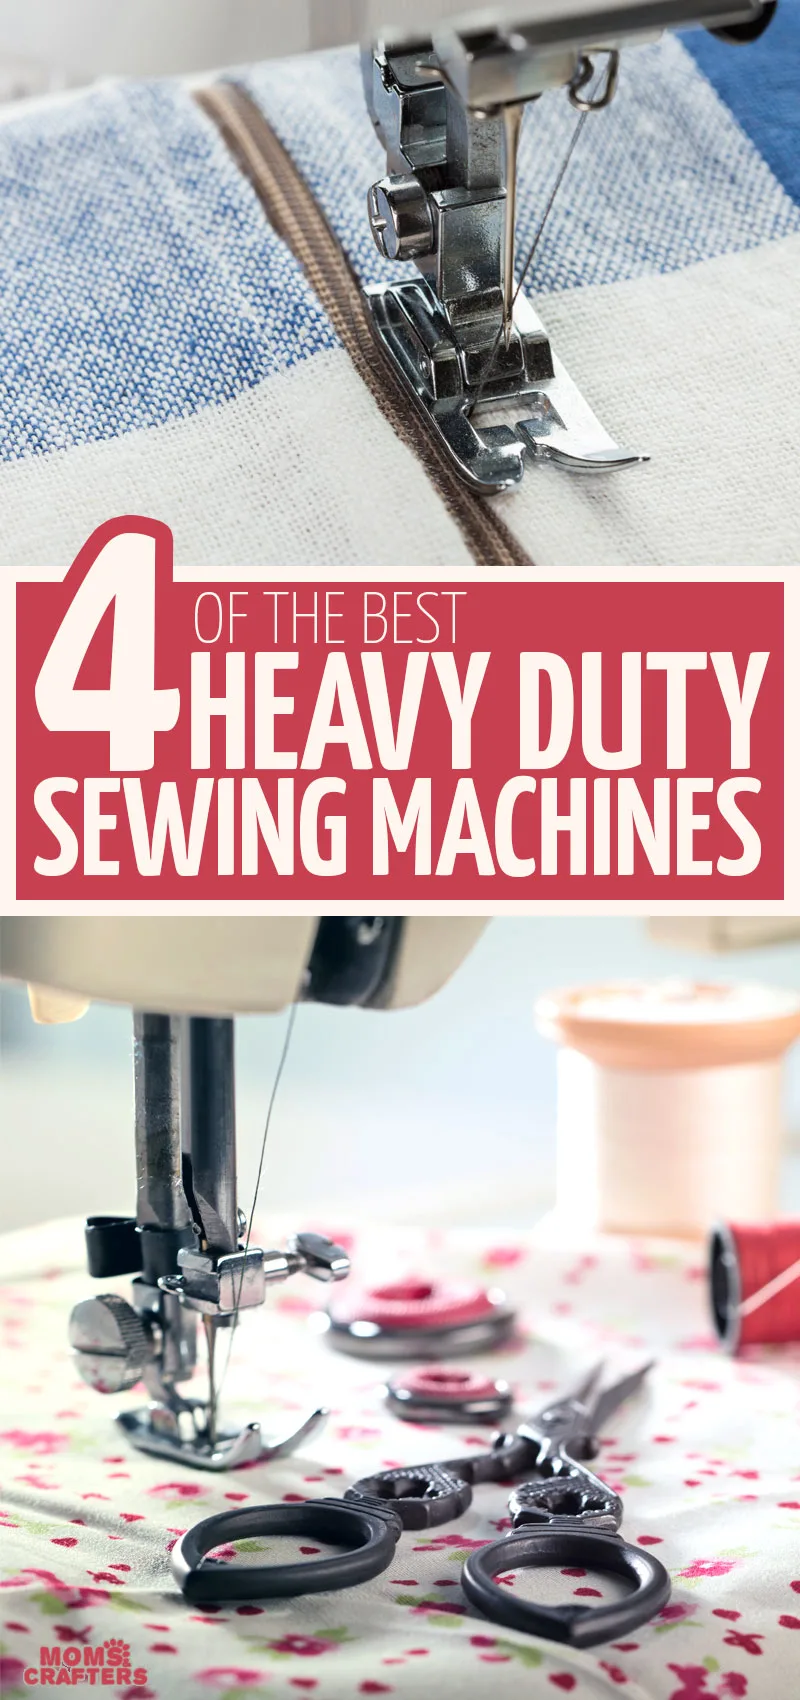 Best HeavyDuty Sewing Machines for Artists and Designers  ARTnewscom